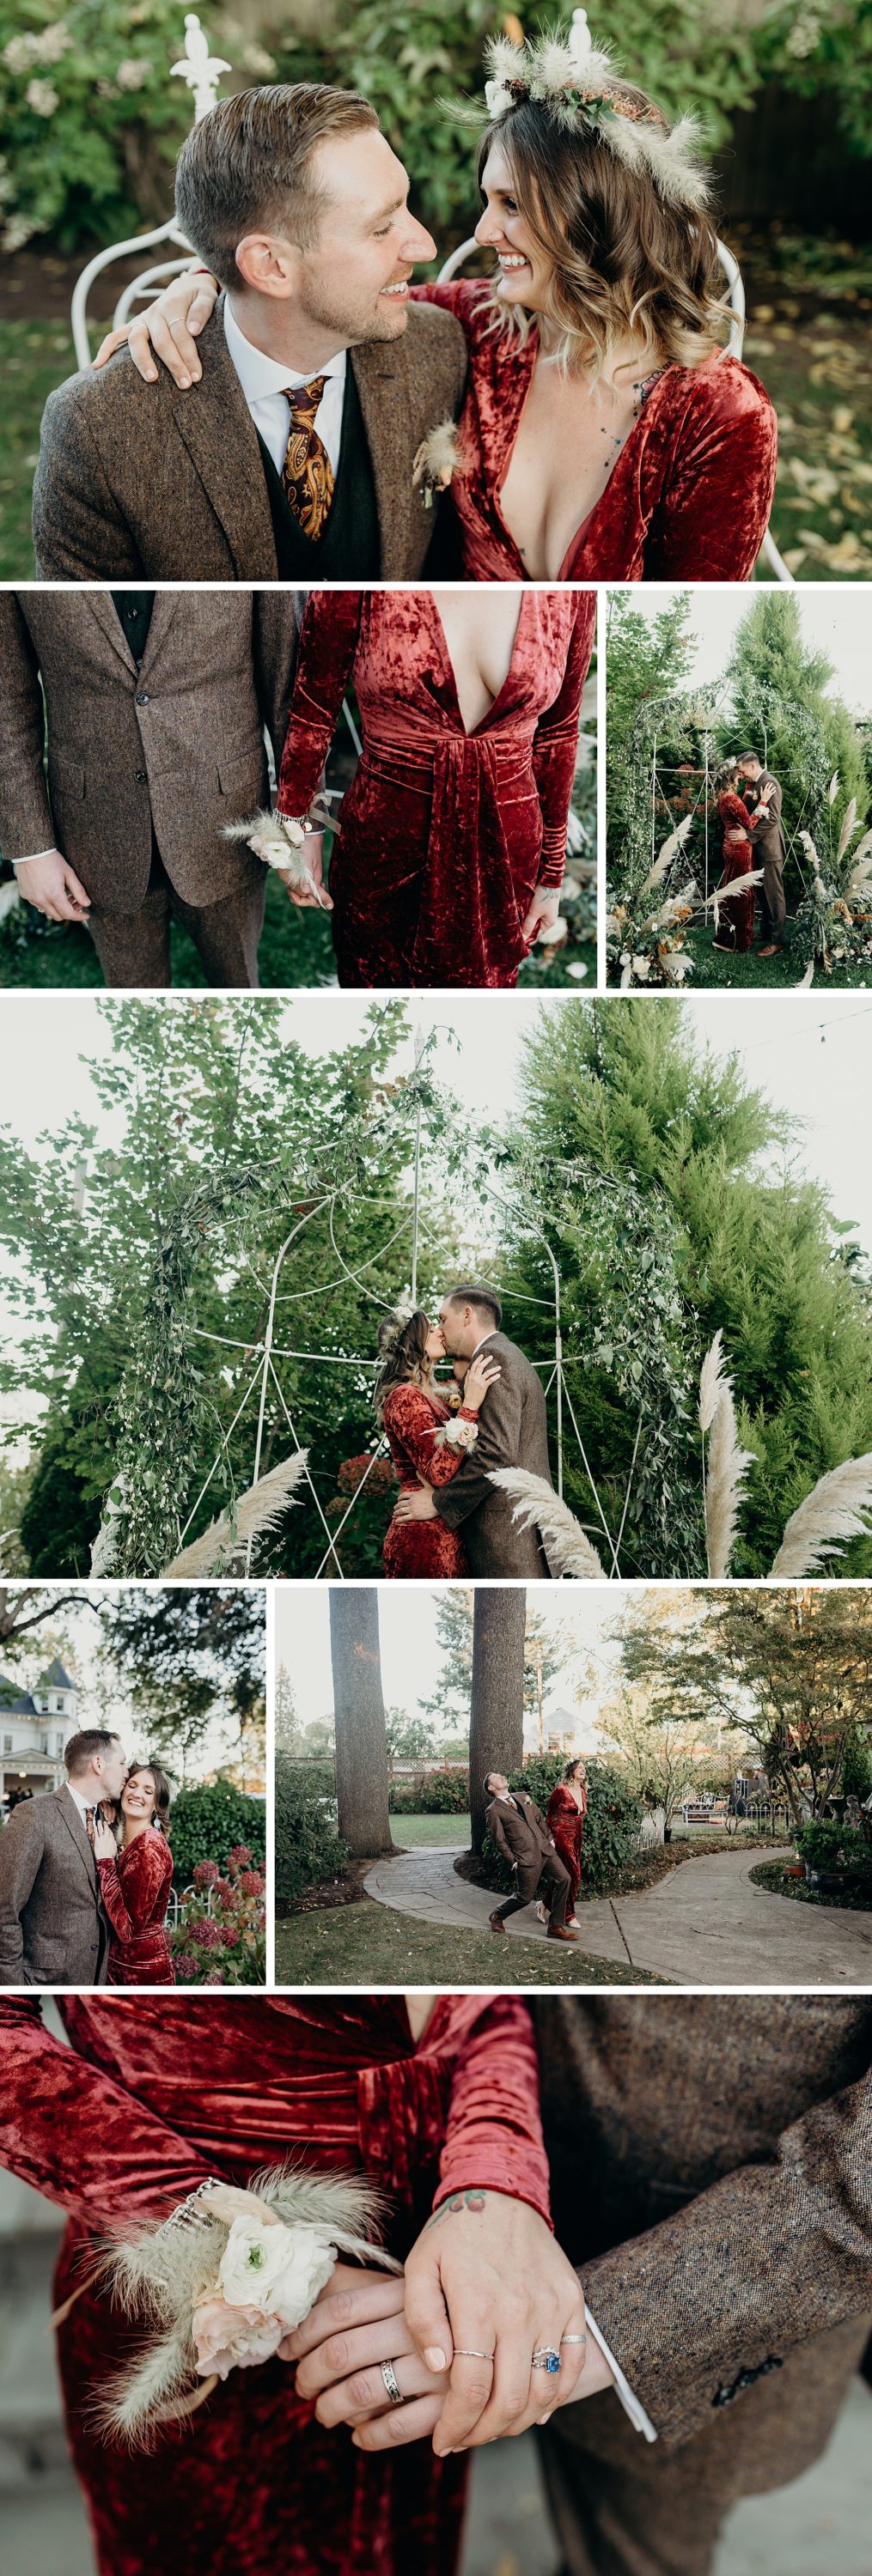 Bohemian bridal portraits at this autumn Victorian Belle wedding in Portland, OR. Photographed by Pacific Northwest Wedding Photographer, Briana Morrison